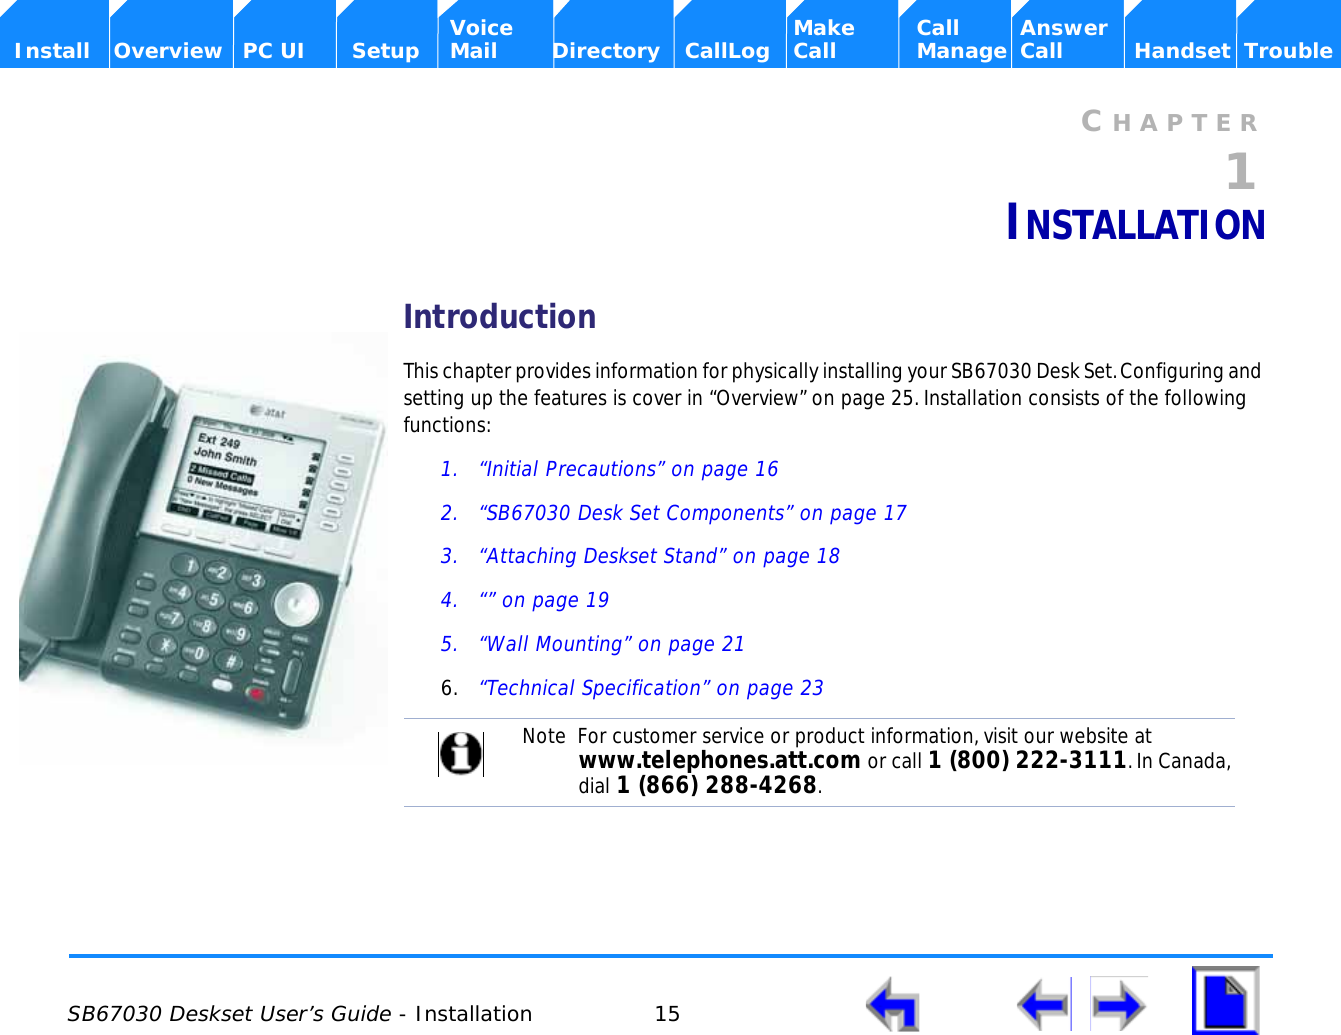  SB67030 Deskset User’s Guide - Installation 15    Voice Make Call Answer  Install Overview PC UI Setup Mail Directory CallLog Call Manage Call Handset TroubleCHAPTER1INSTALLATIONIntroductionThis chapter provides information for physically installing your SB67030 Desk Set. Configuring and setting up the features is cover in “Overview” on page 25. Installation consists of the following functions:1. “Initial Precautions” on page 162. “SB67030 Desk Set Components” on page 173. “Attaching Deskset Stand” on page 184. “” on page 195. “Wall Mounting” on page 216. “Technical Specification” on page 23Note  For customer service or product information, visit our website at www.telephones.att.com or call 1 (800) 222-3111. In Canada, dial 1 (866) 288-4268.